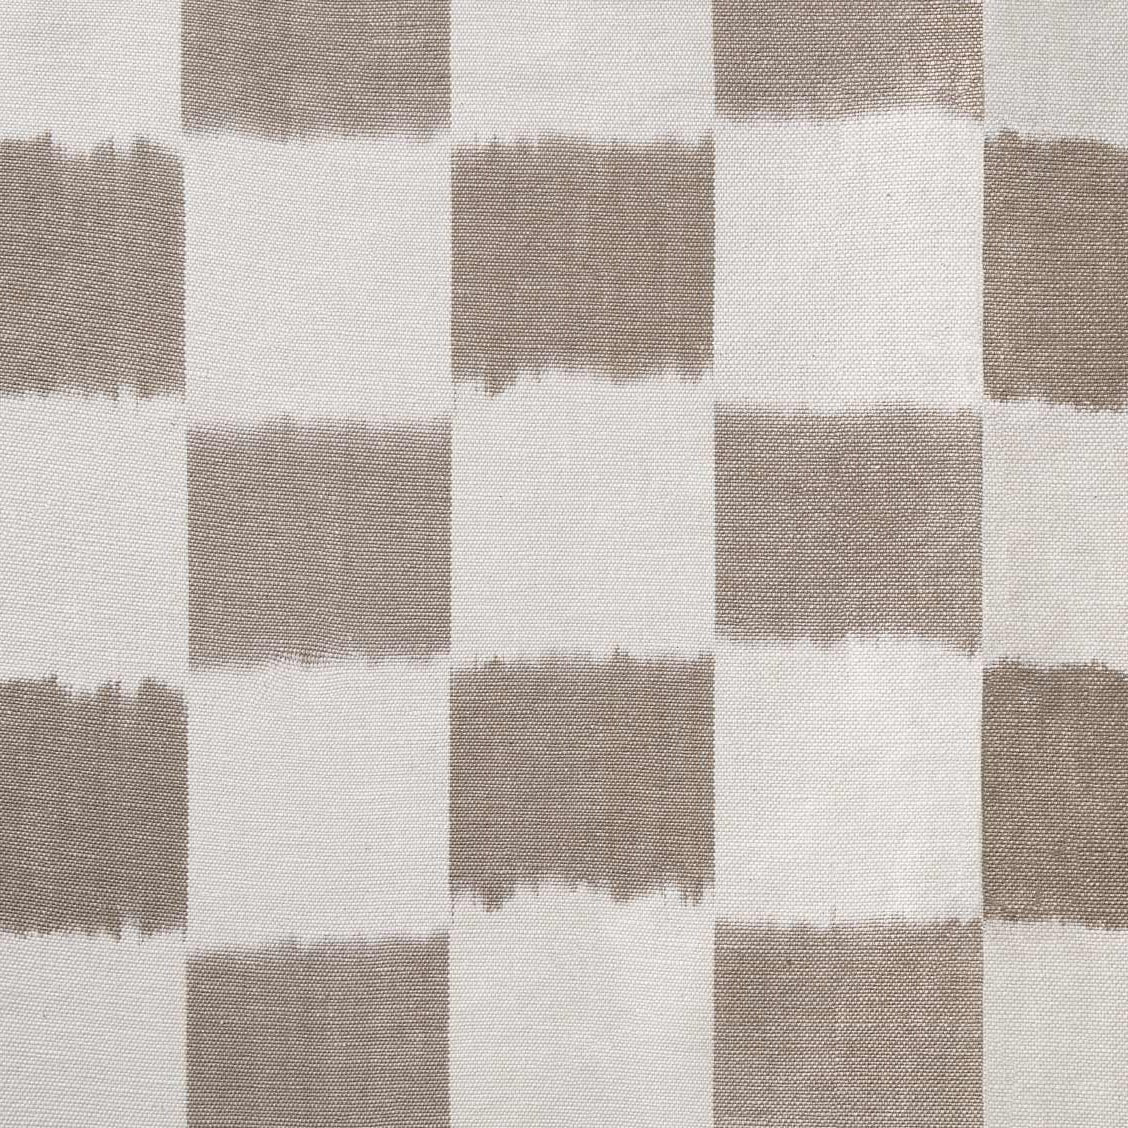 Checkerboard - Taupe